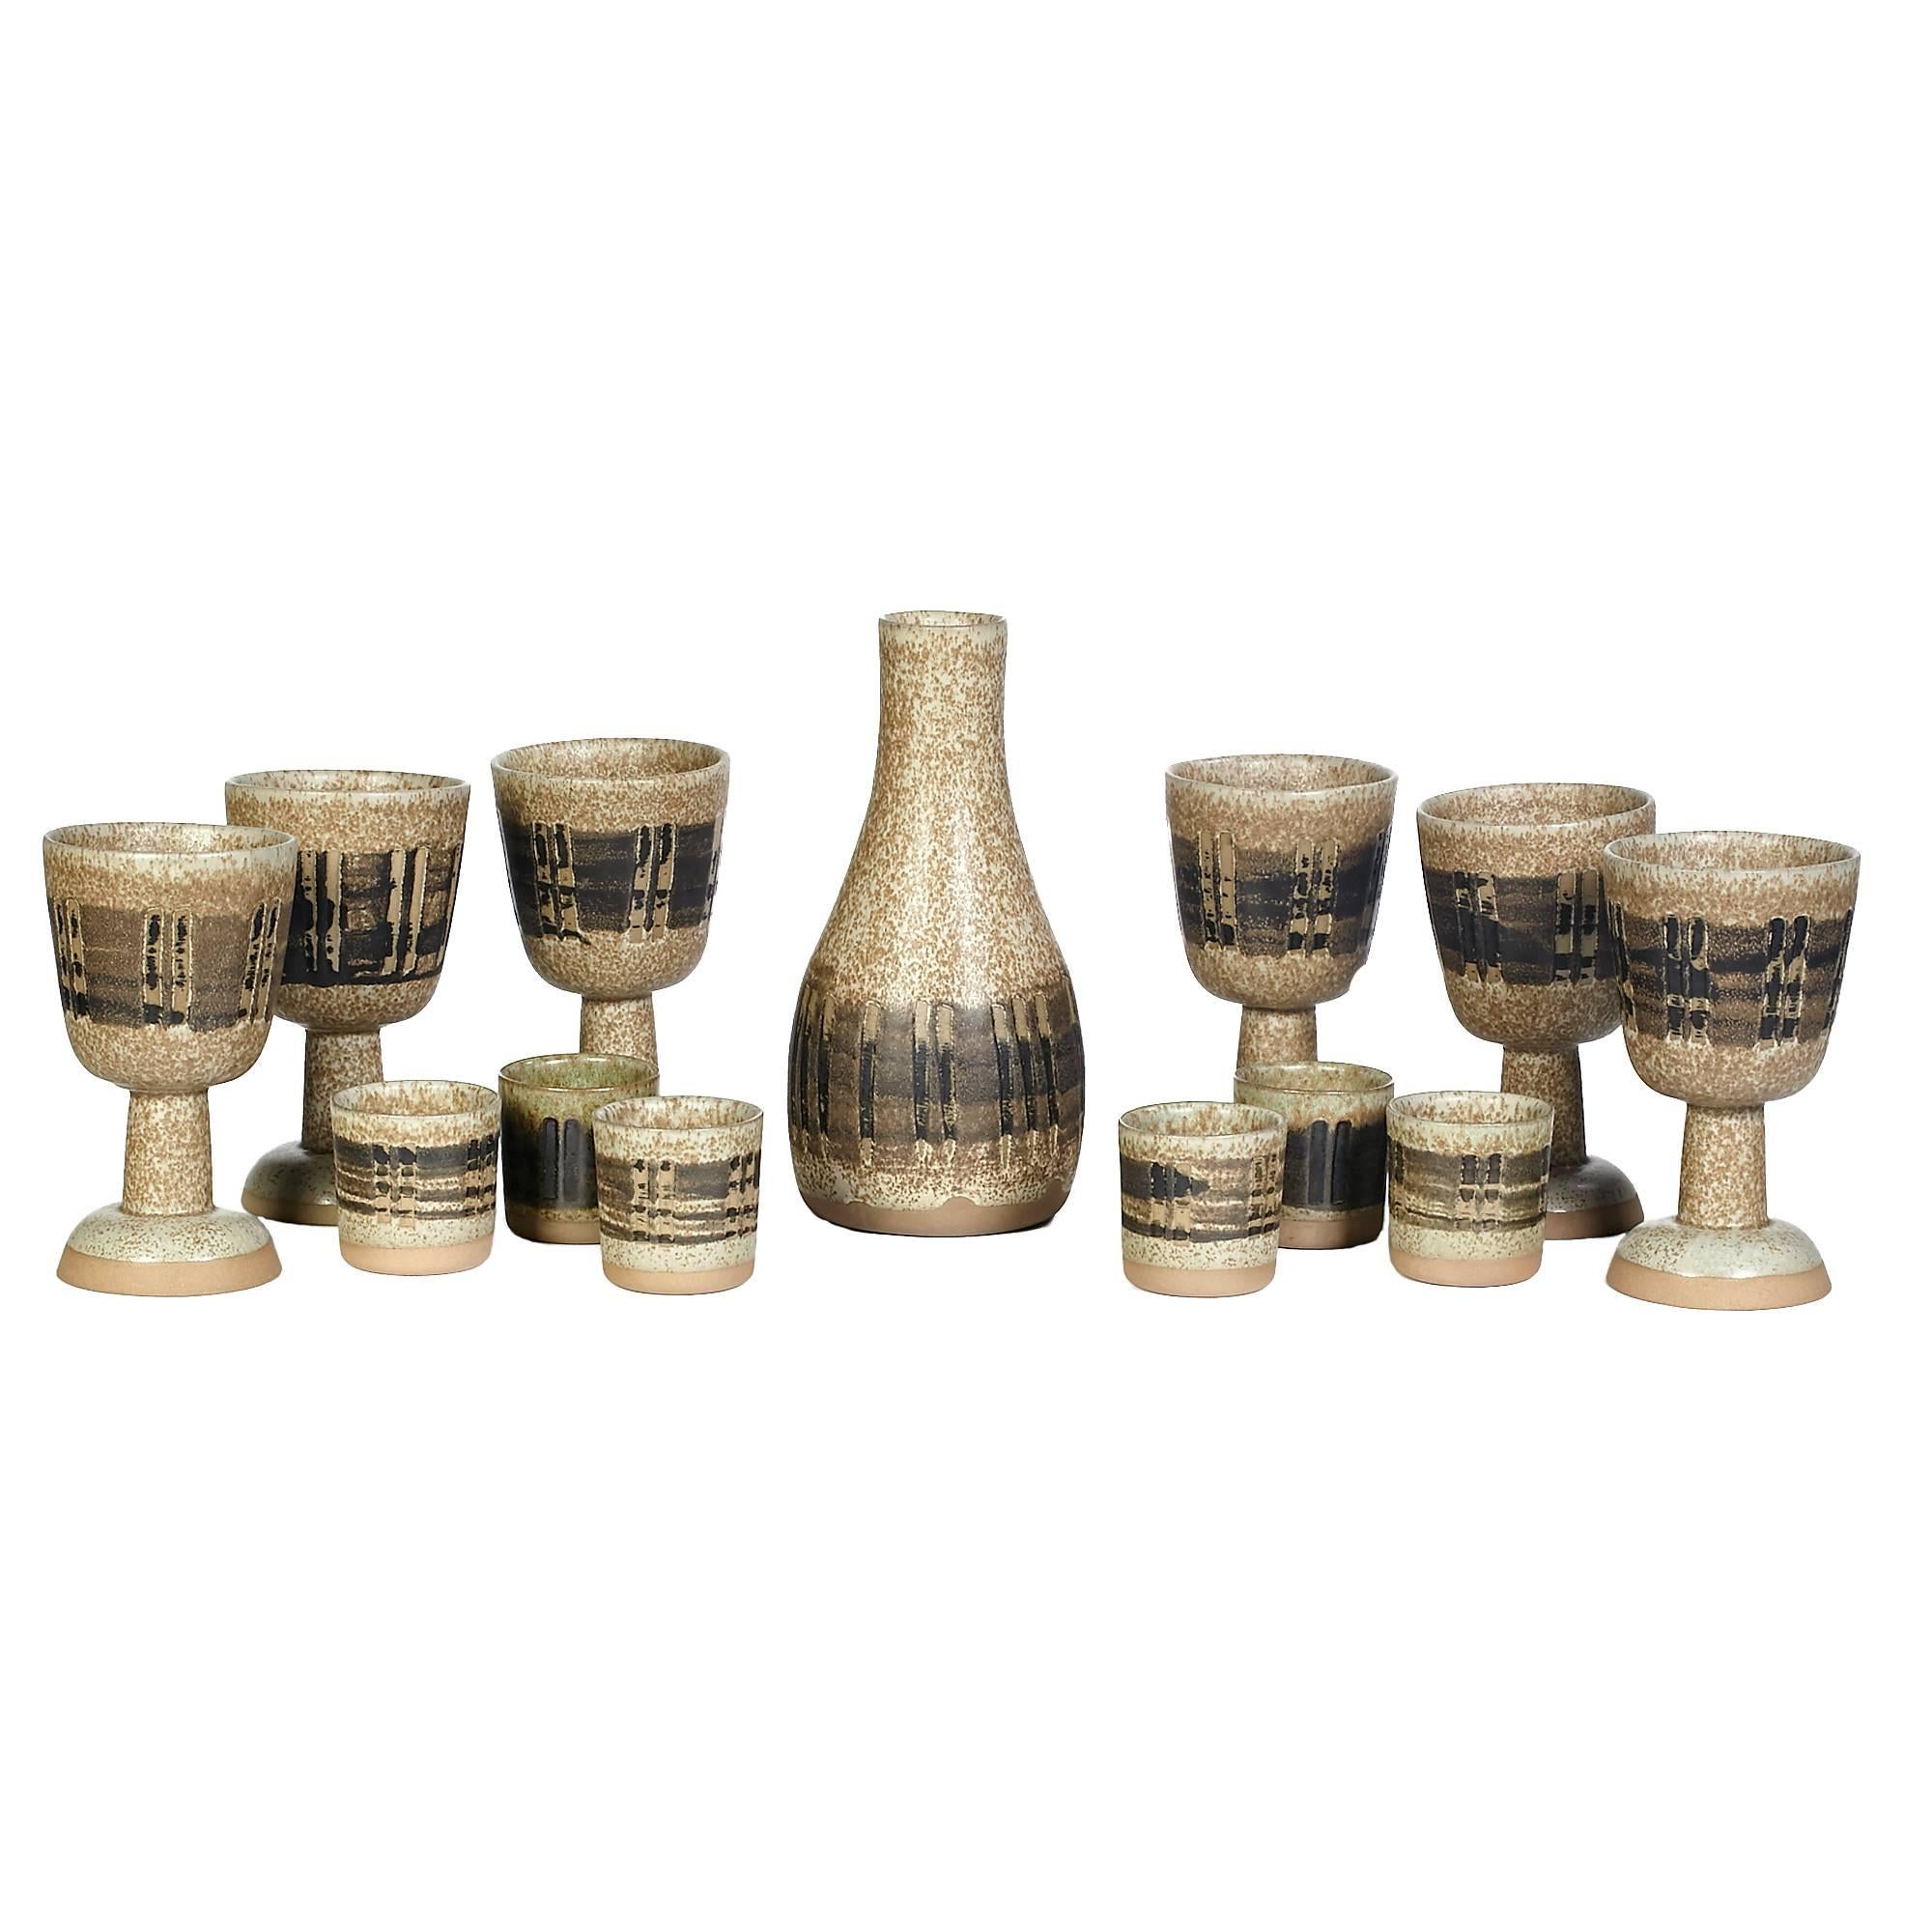 Gordon and Jane Martz for Marshall Studios 1960, 13-piece handmade ceramic beverage set with six footed tumblers, six small tumblers and a carafe. The set has a speckled background with a various brown stripe design. The footed tumblers are 3.75